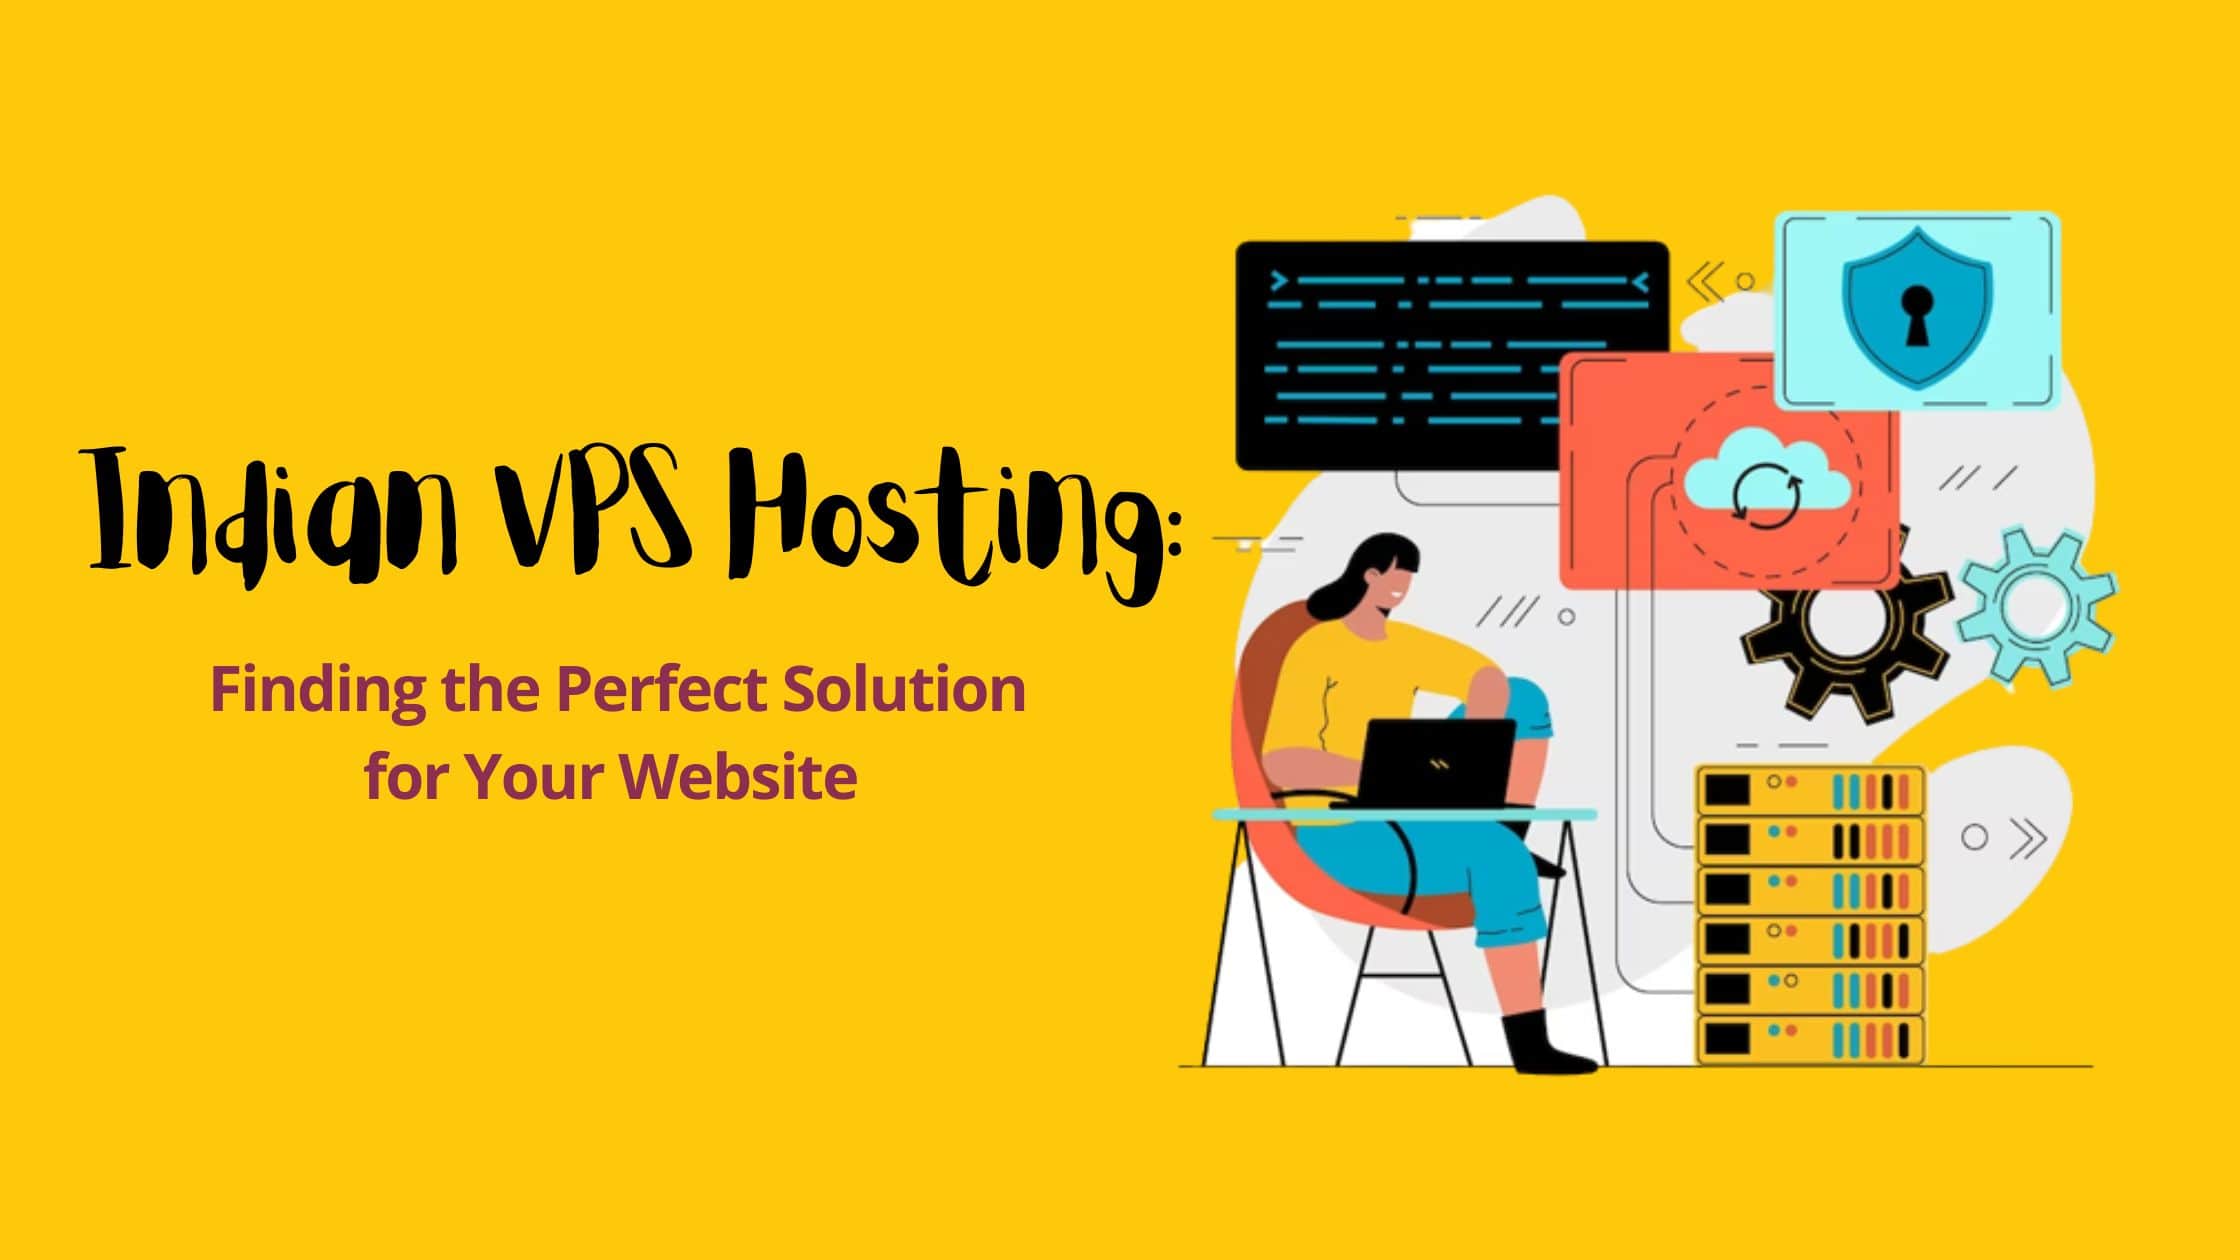 Indian VPS hosting: Finding the perfect solution for your website